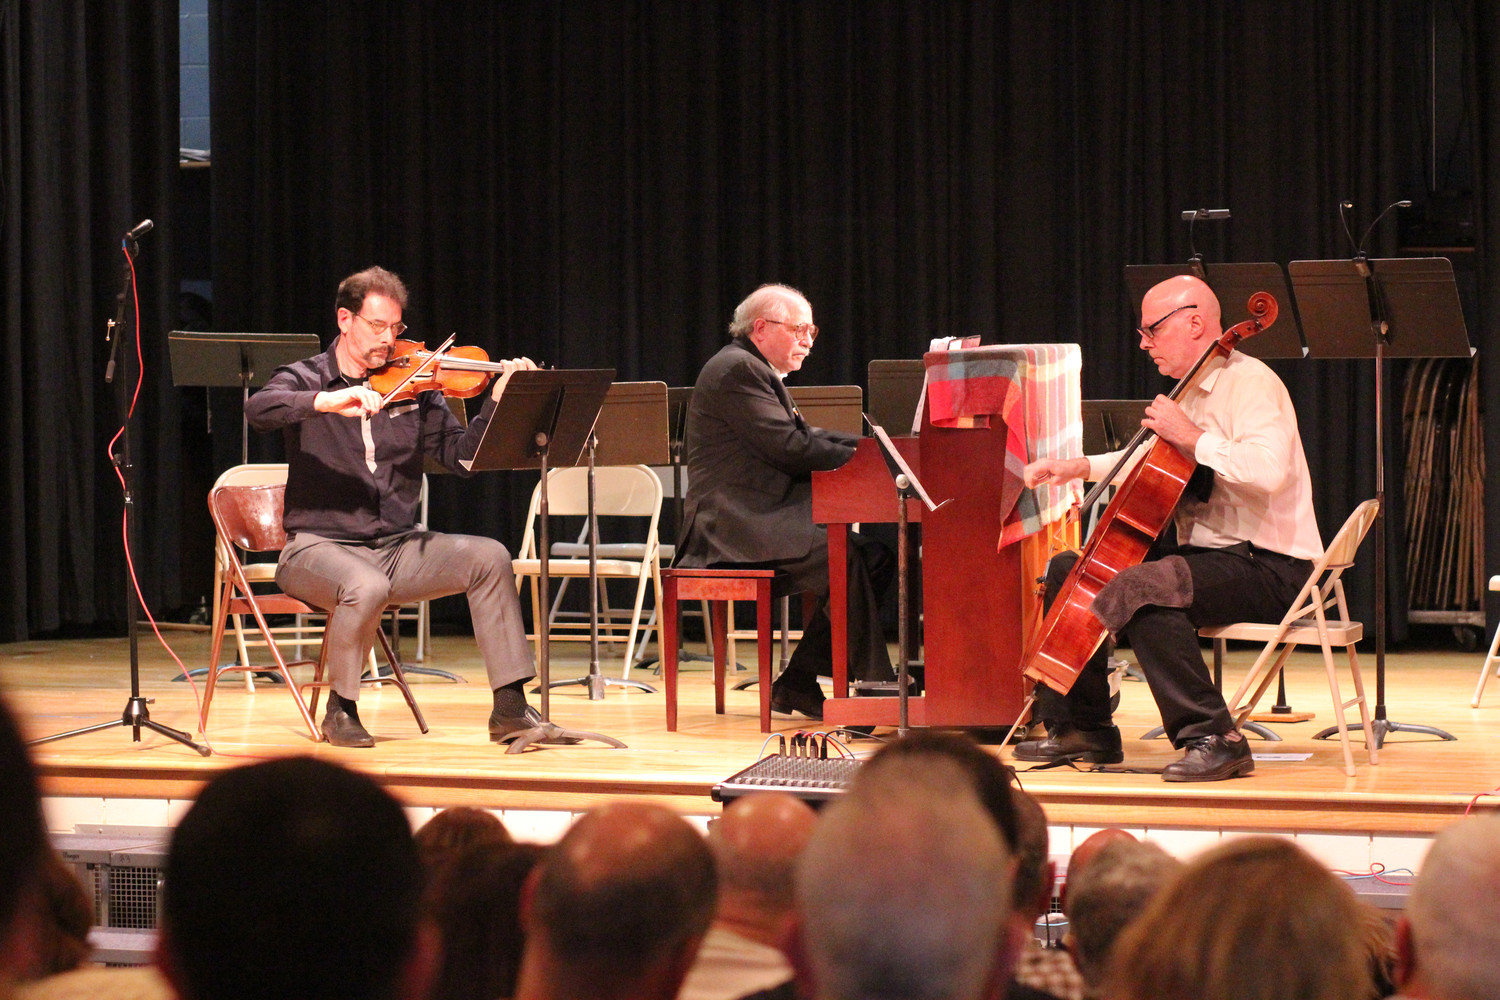 The Dakule Trio, from left, violinist Daniel Hyman, pianist Leonard Lehrman and cellist Kurt Behnke, performed “Trio (‘Invictus’),” a piece composed by Herbert Rothgarber in 2001, during a tribute to Rothgarber at Oceanside School No. 8 on Nov. 5.